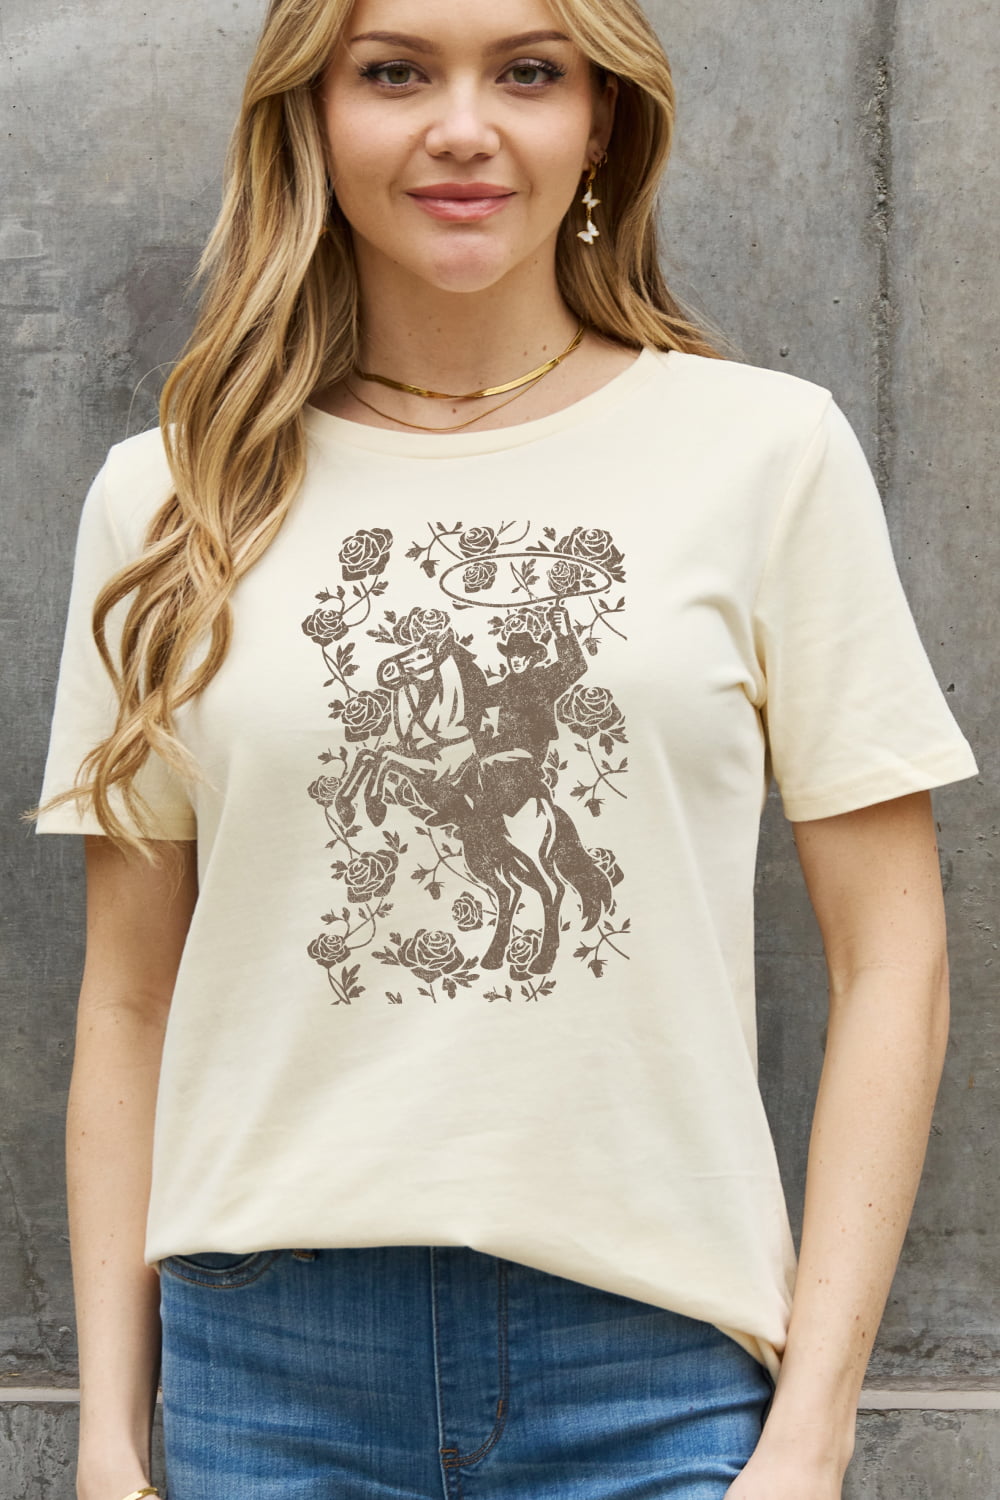 Simply Love Cowboy Graphic Cotton Tee